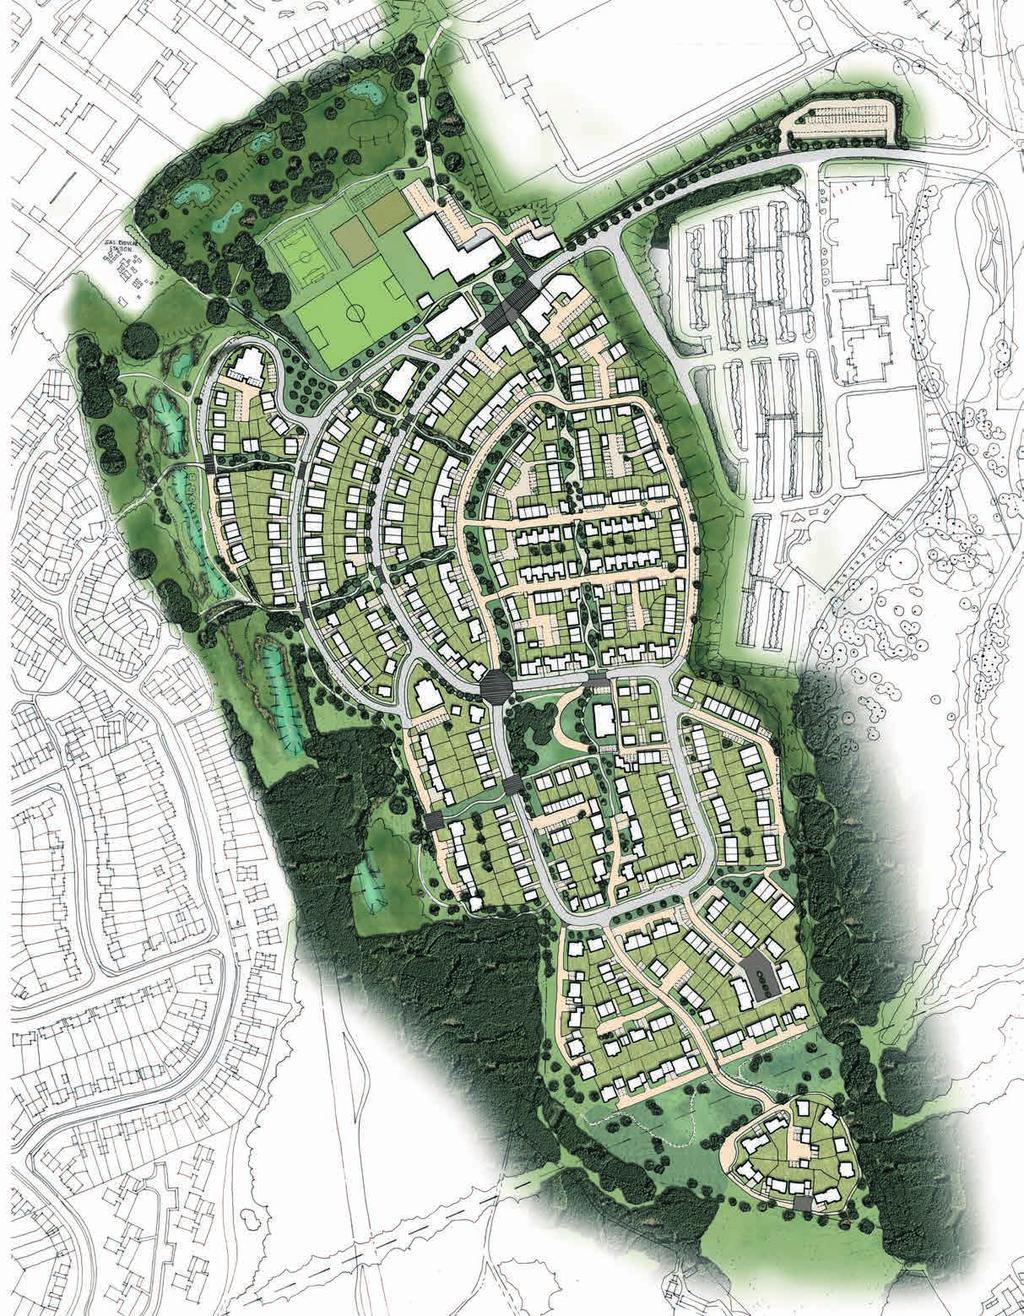 masterplan 17 3 1 2 1 Access to site via Knights Way 2 Mied use buildings frame the Knights Square 3 Possible school site located in a less sloping part of site 4 Spine road sweeps up to follow the